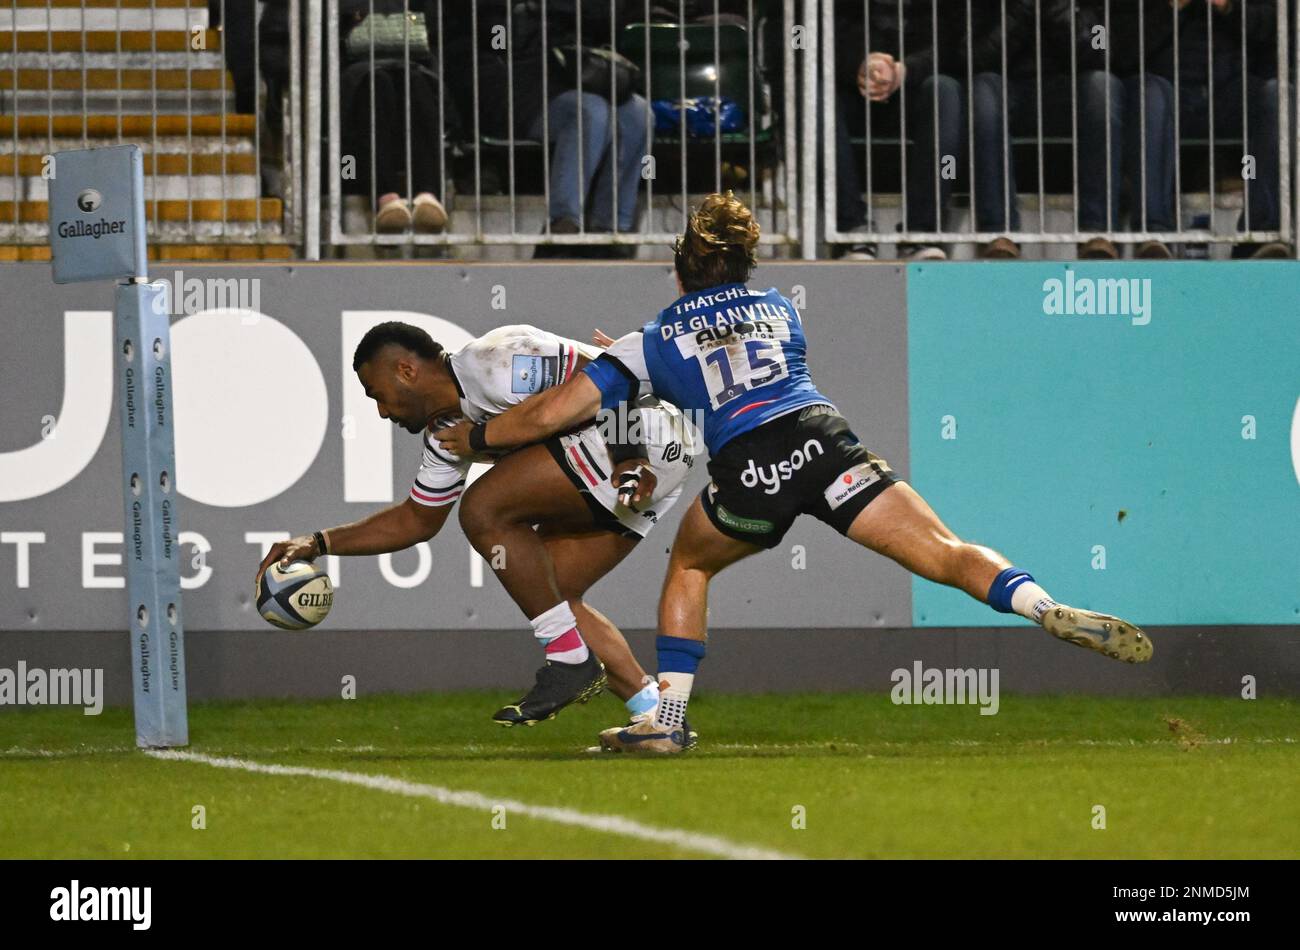 24th February 2023,  The Recreation Ground, Bath, Somerset, England; Gallagher Premiership Rugby, Bath versus Bristol Bears; Siva Naulago of Bristol Bears scores a try in the corner under pressure from Tom de Glanville of Bath Stock Photo